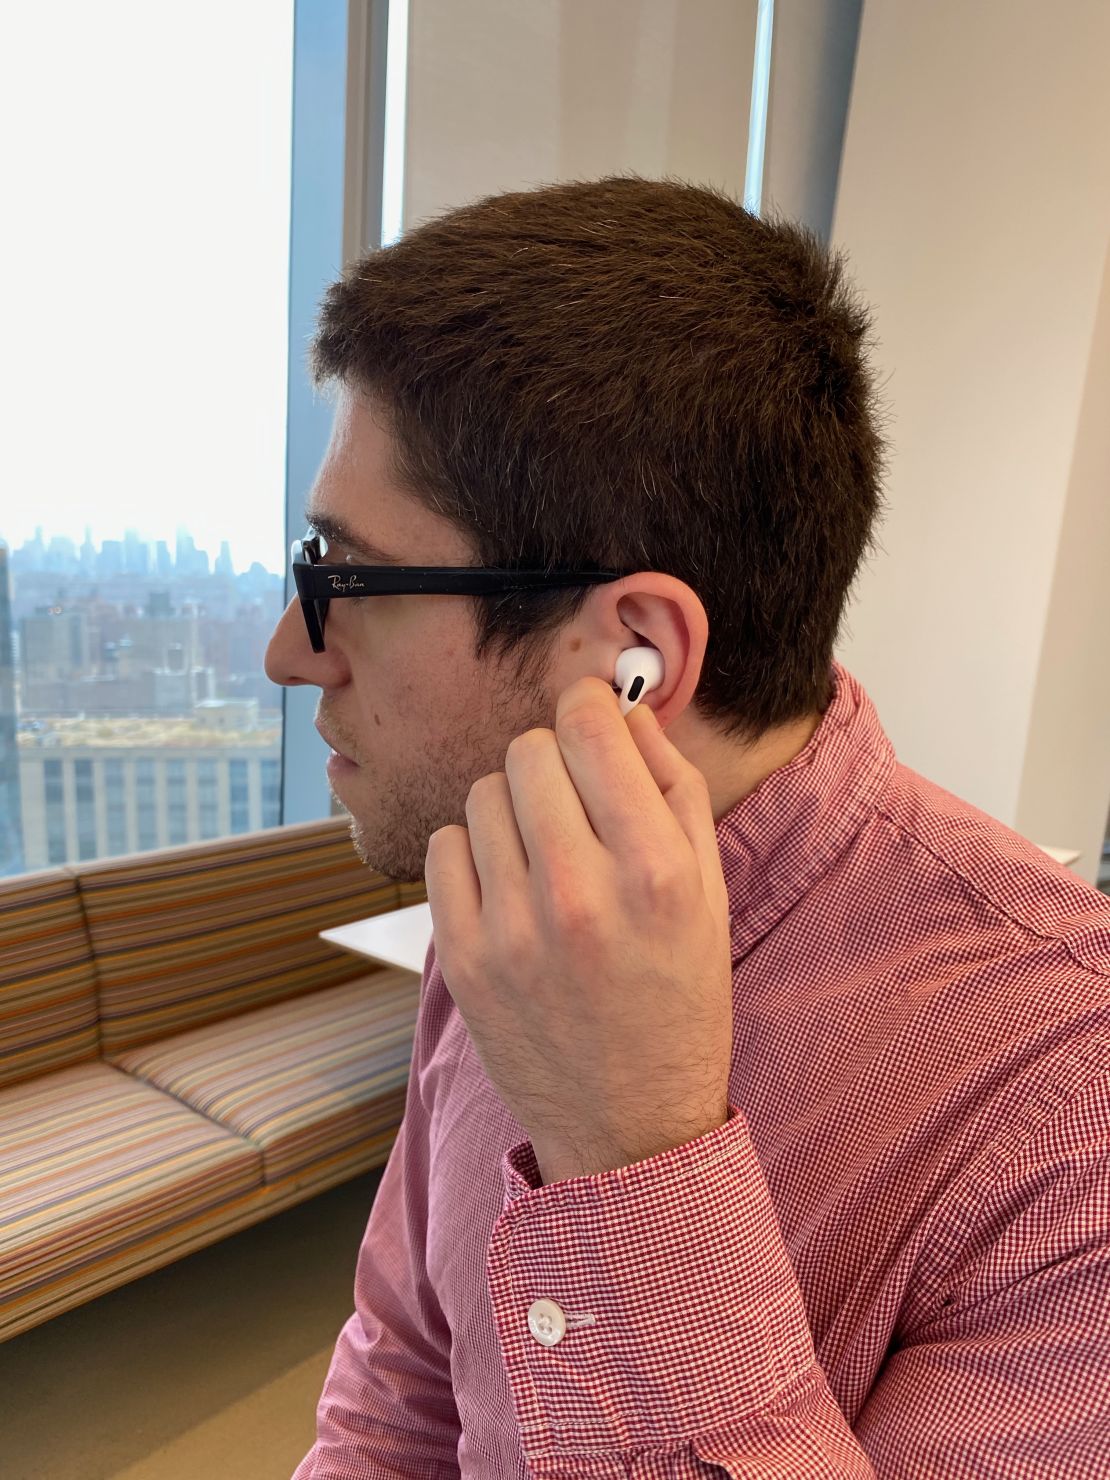 AirPods Pro review: These headphones still rock - CNET